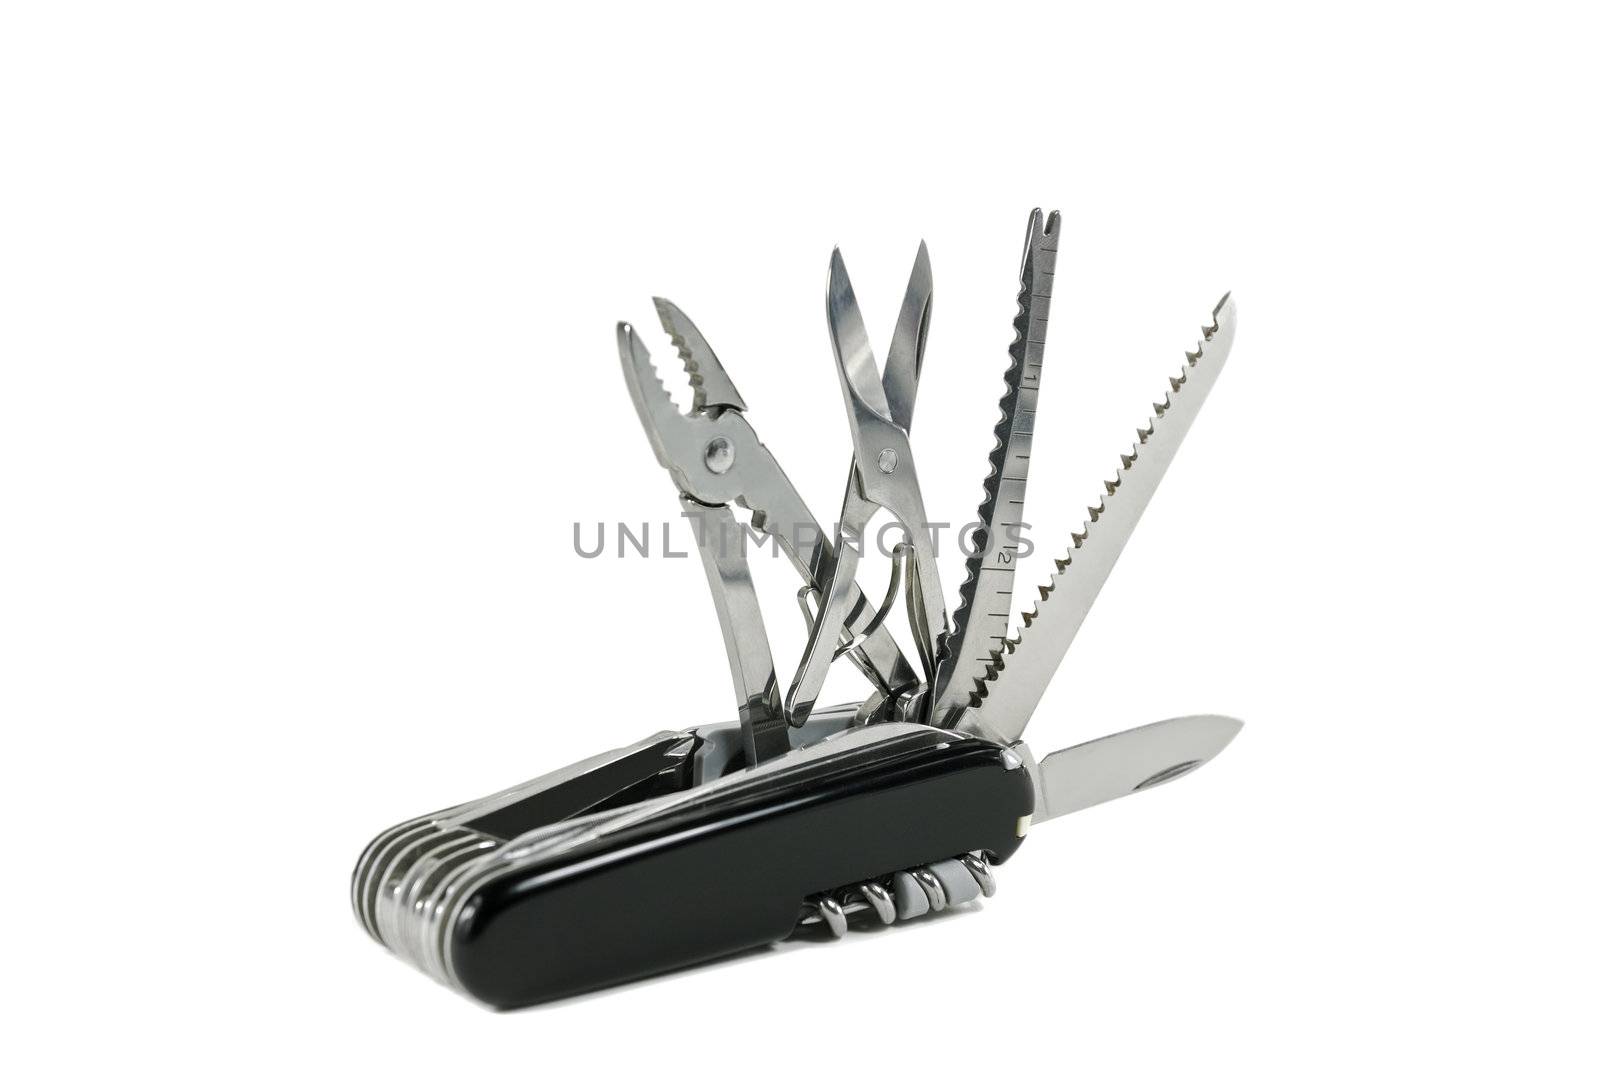 Swiss army knife on isolated white background